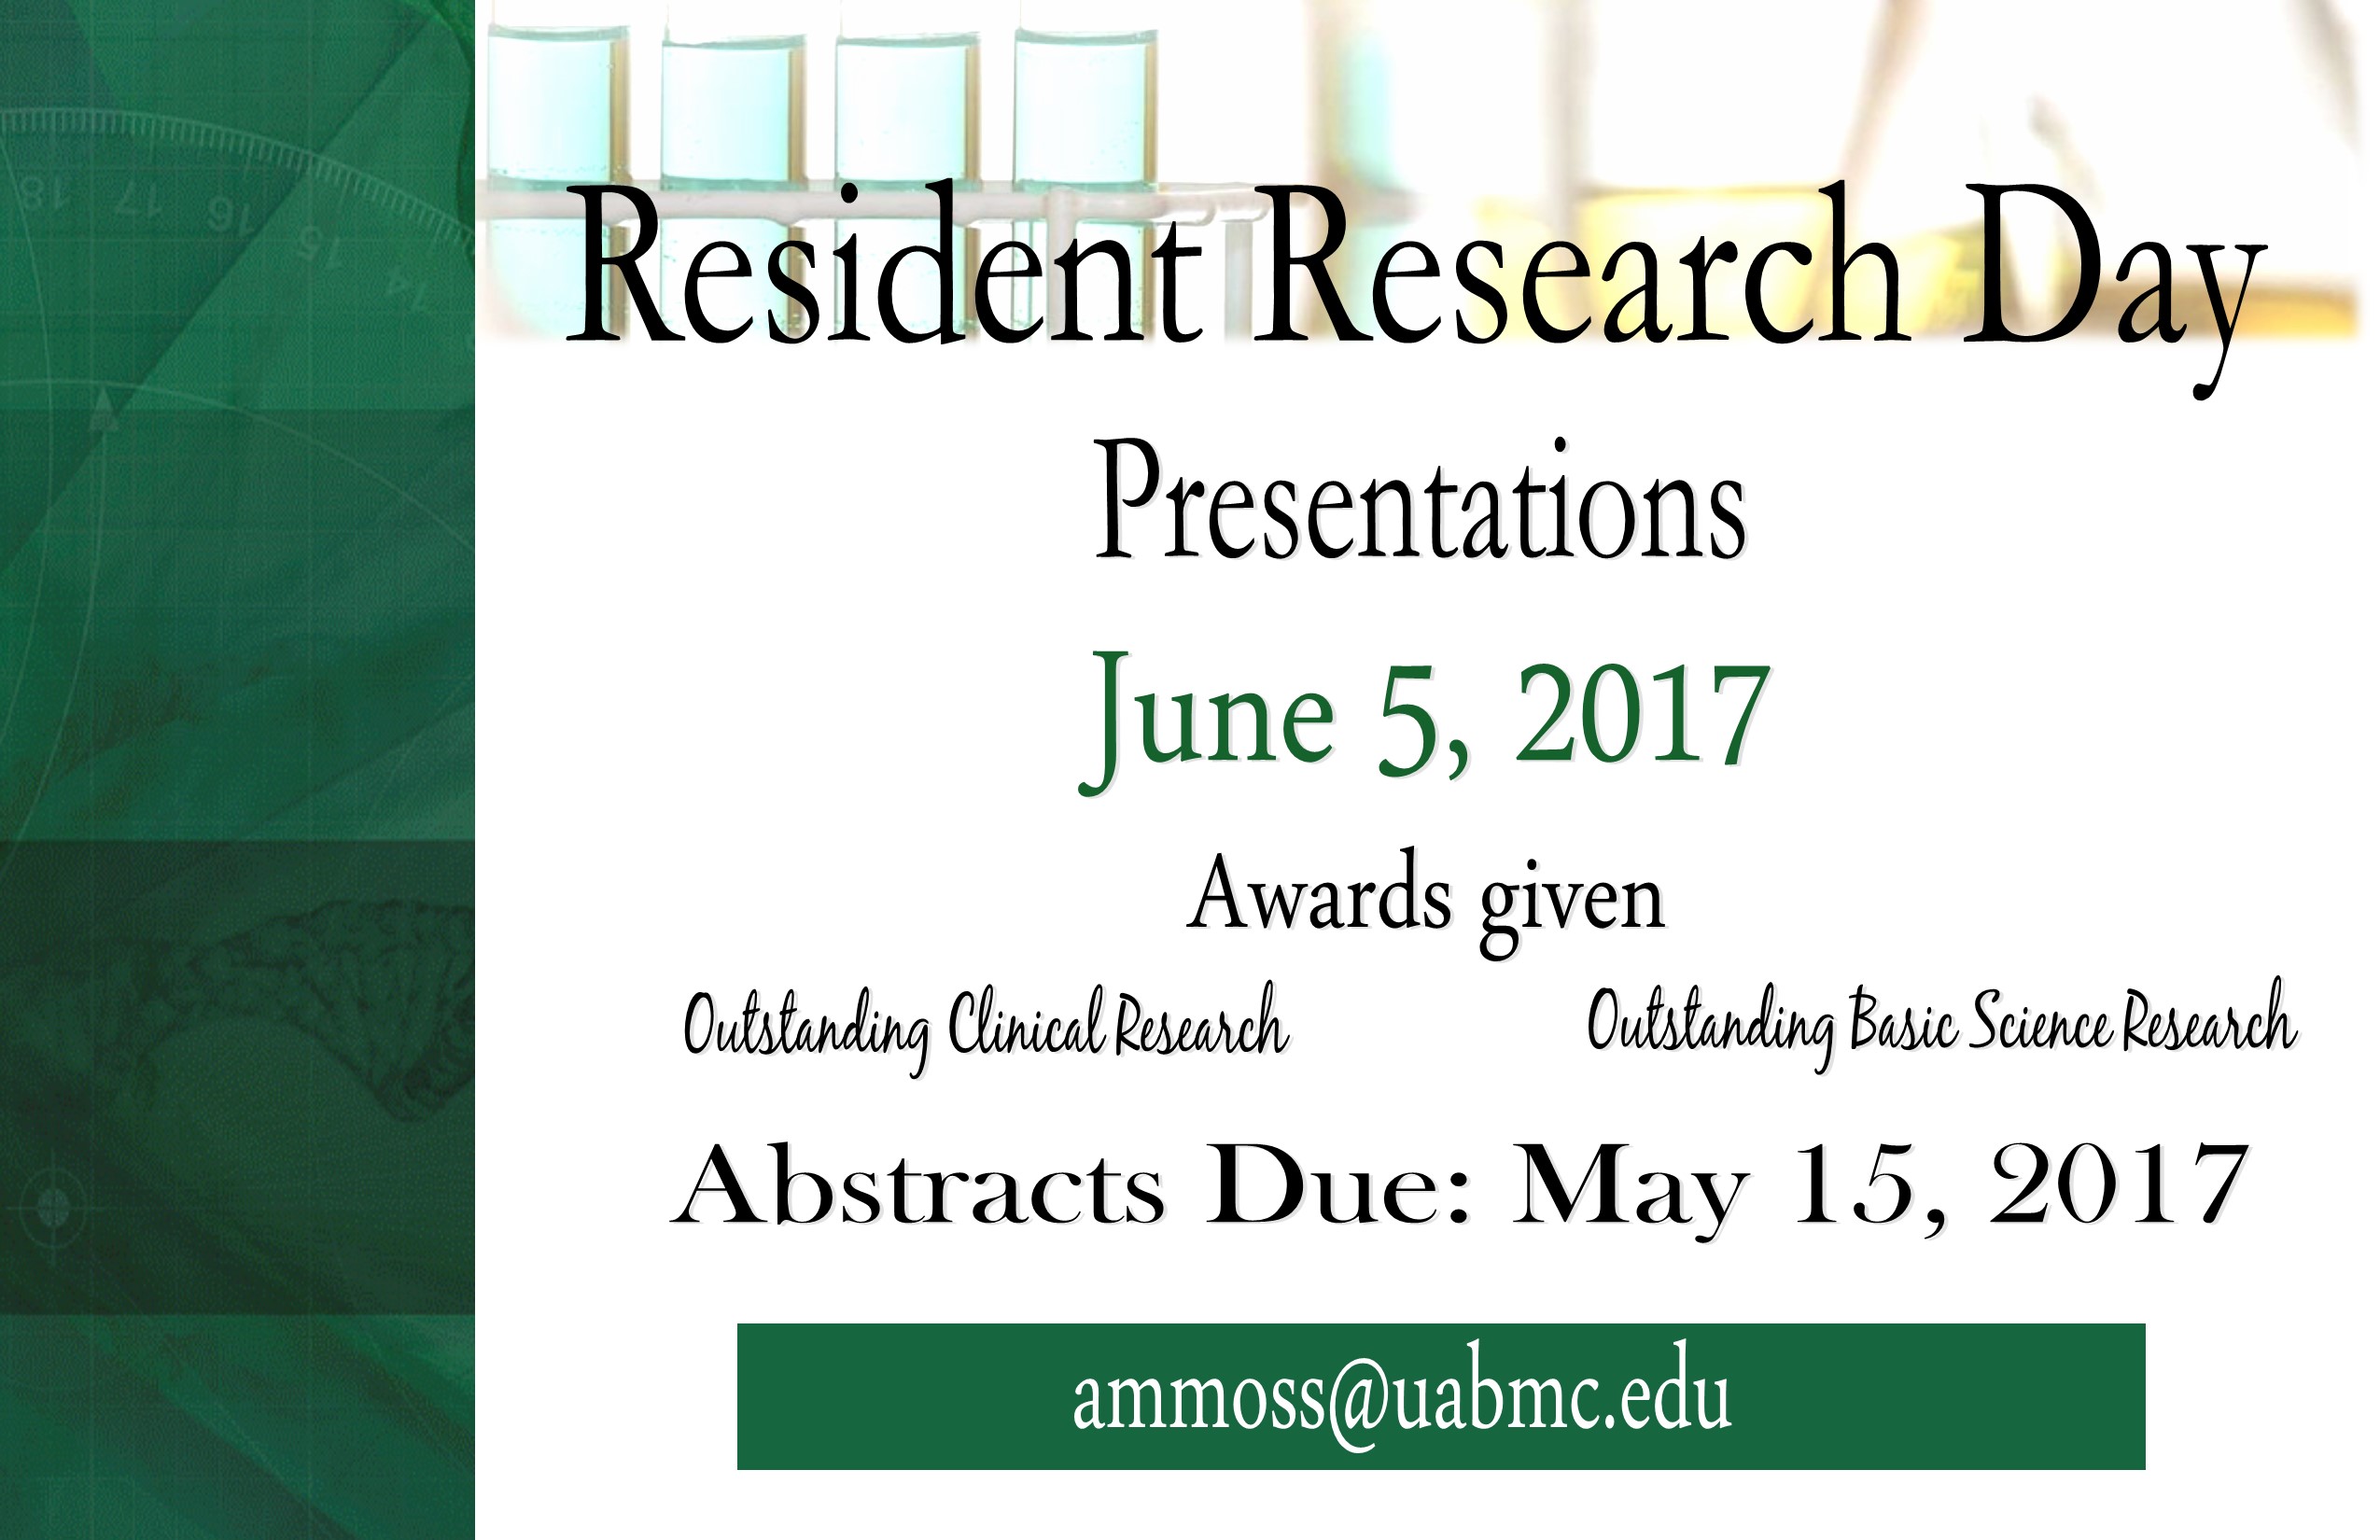 Resident Research Day Presentations